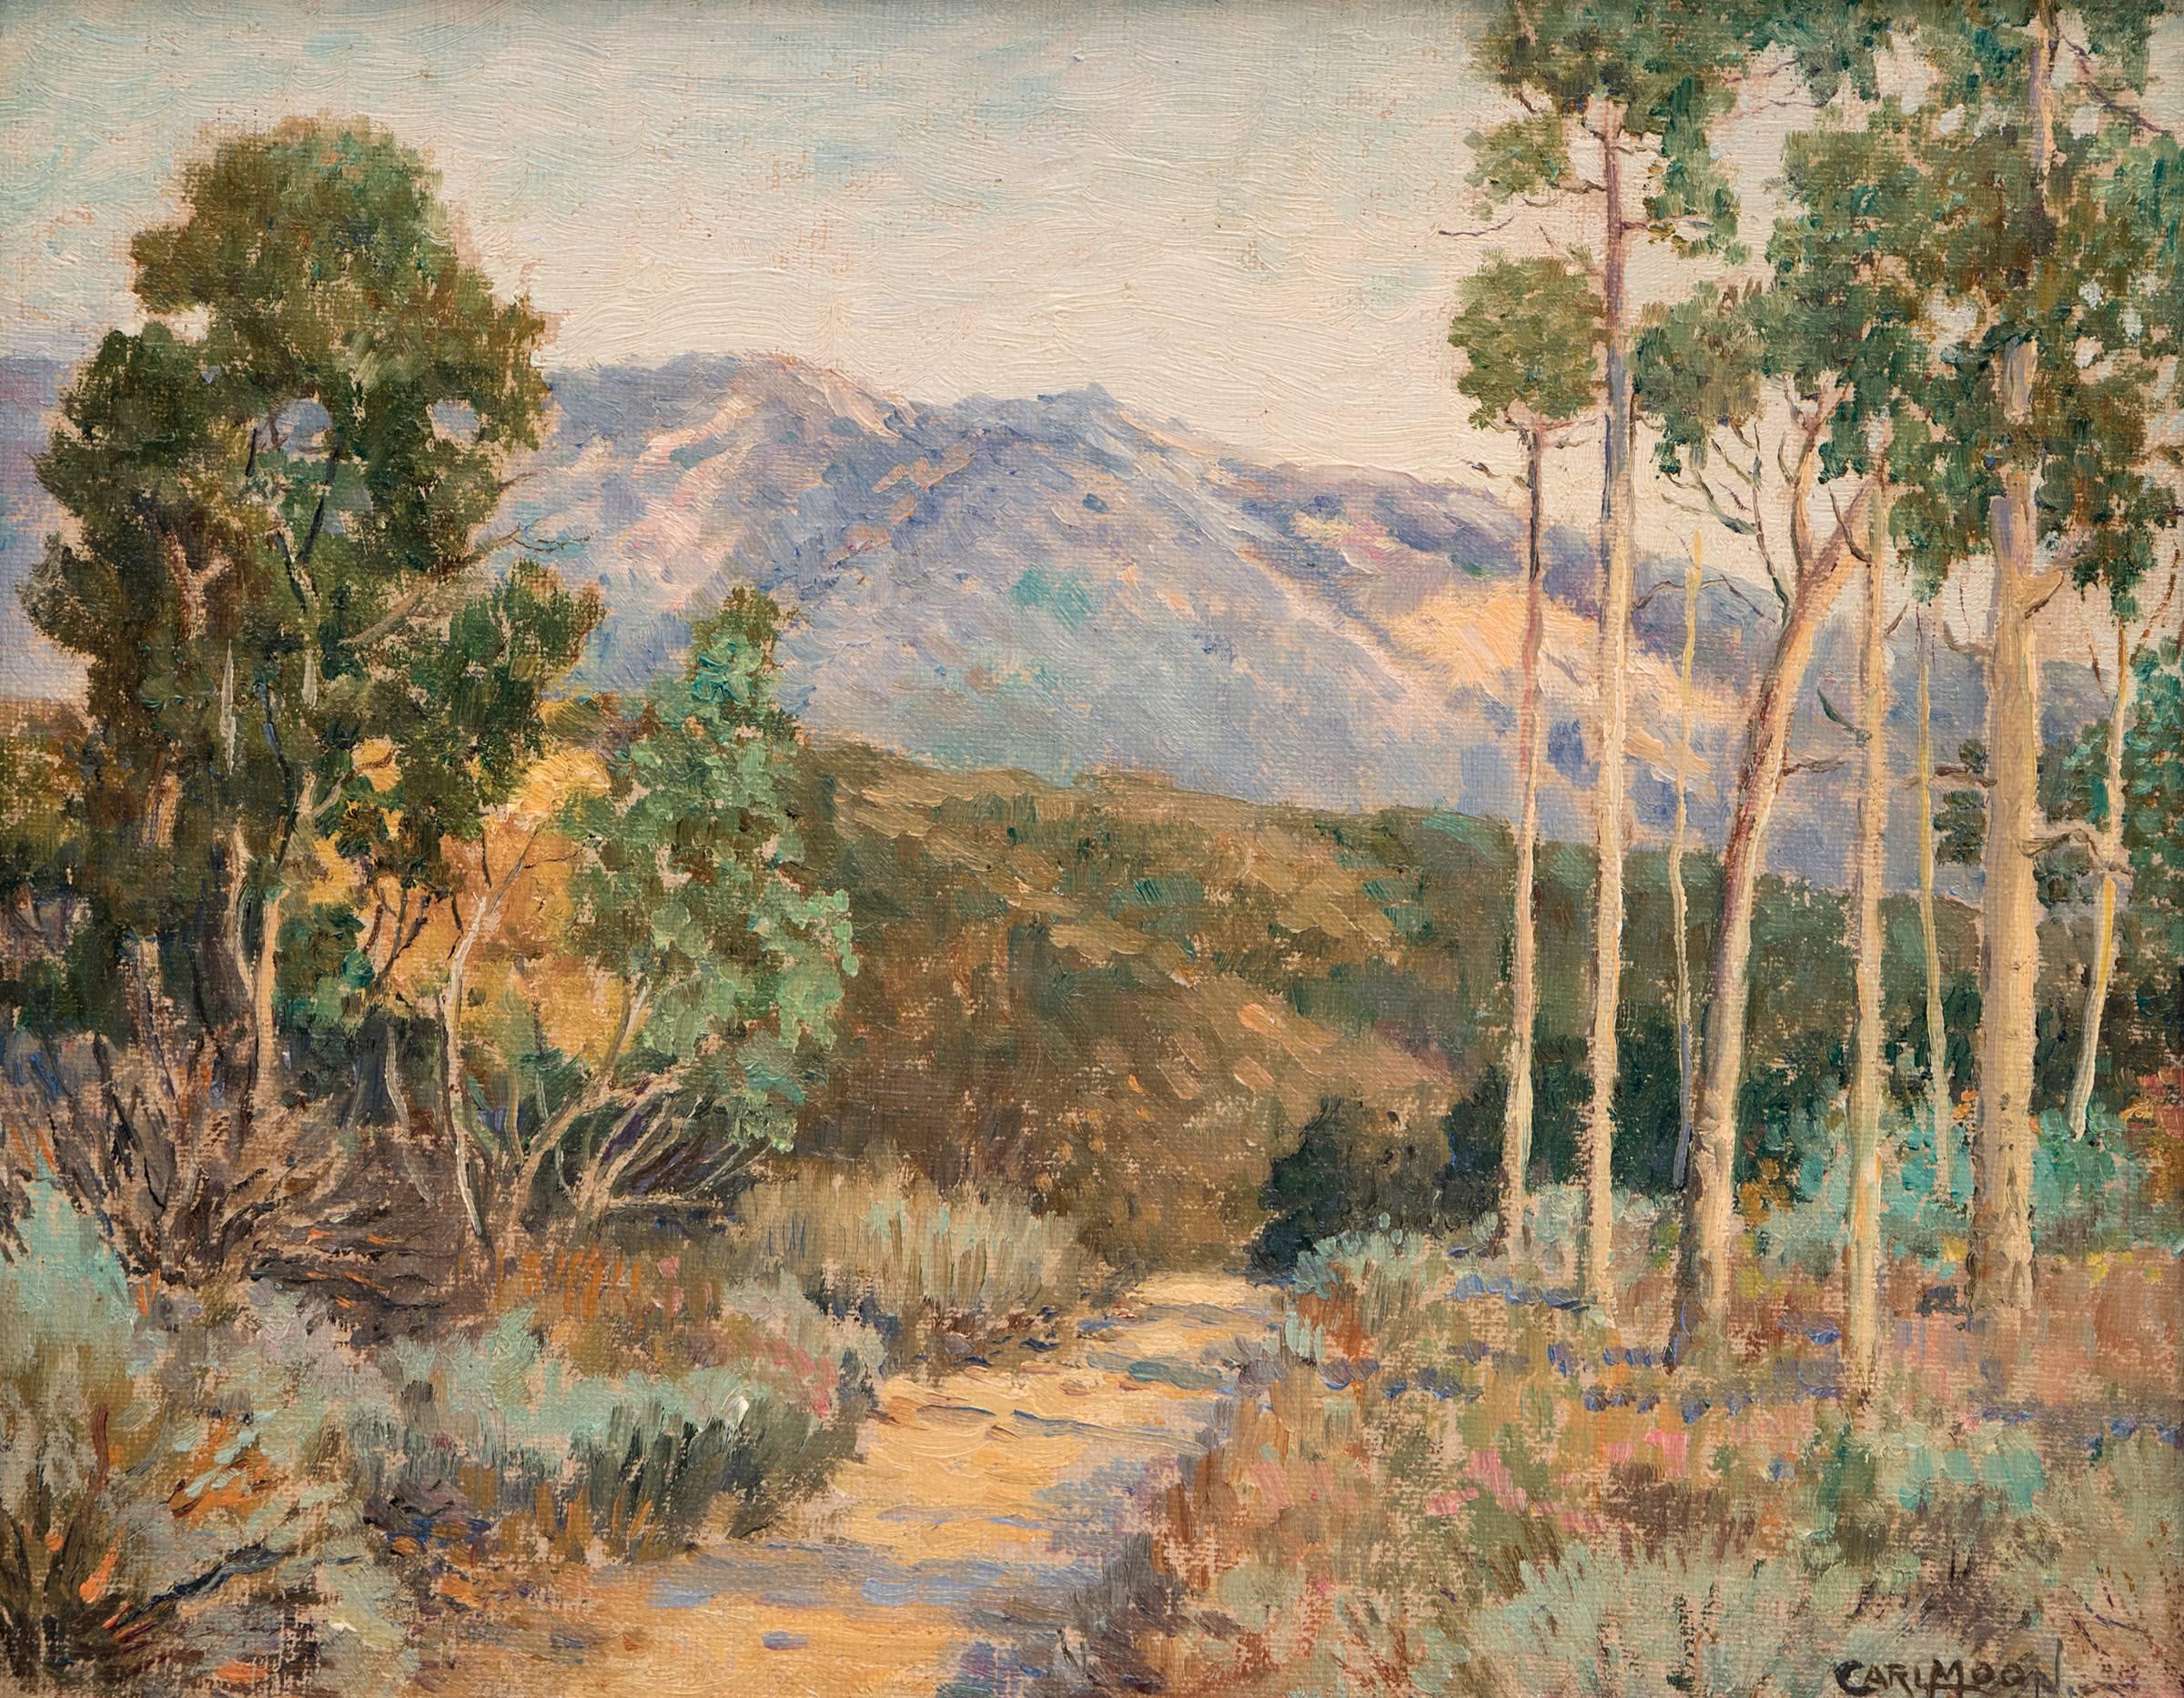 Untitled (California Landscape) - American Impressionist Painting by Carl Moon